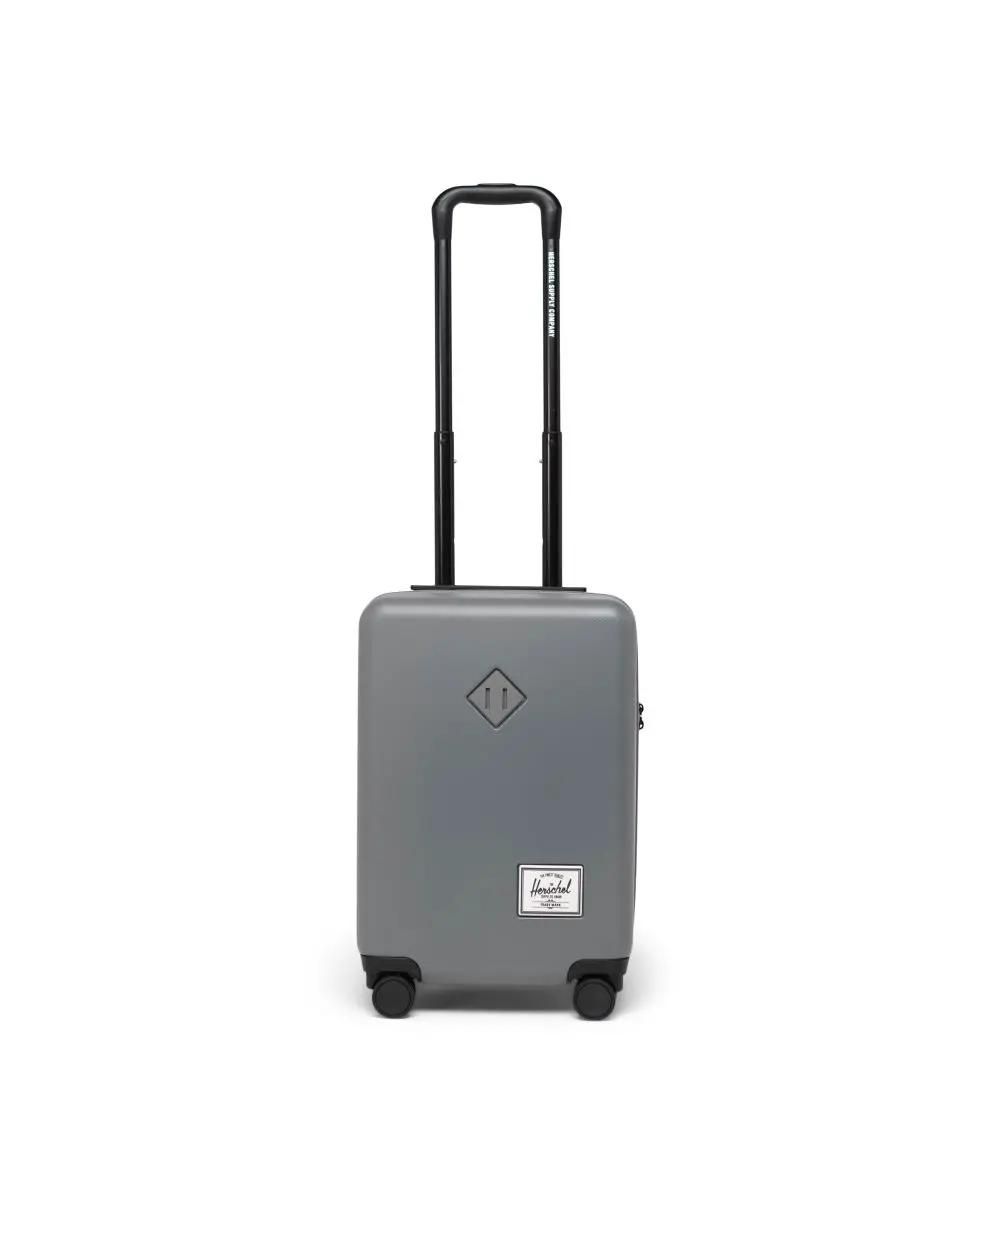 <p><strong>$225.00</strong></p><p>Herschel's new collection of hardshell luggage proves the brand is more than just a quality backpack brand. Made from 70 percent recycled impact-resistant polycarbonate, this is a sustainable suitcase you can feel good about.</p>